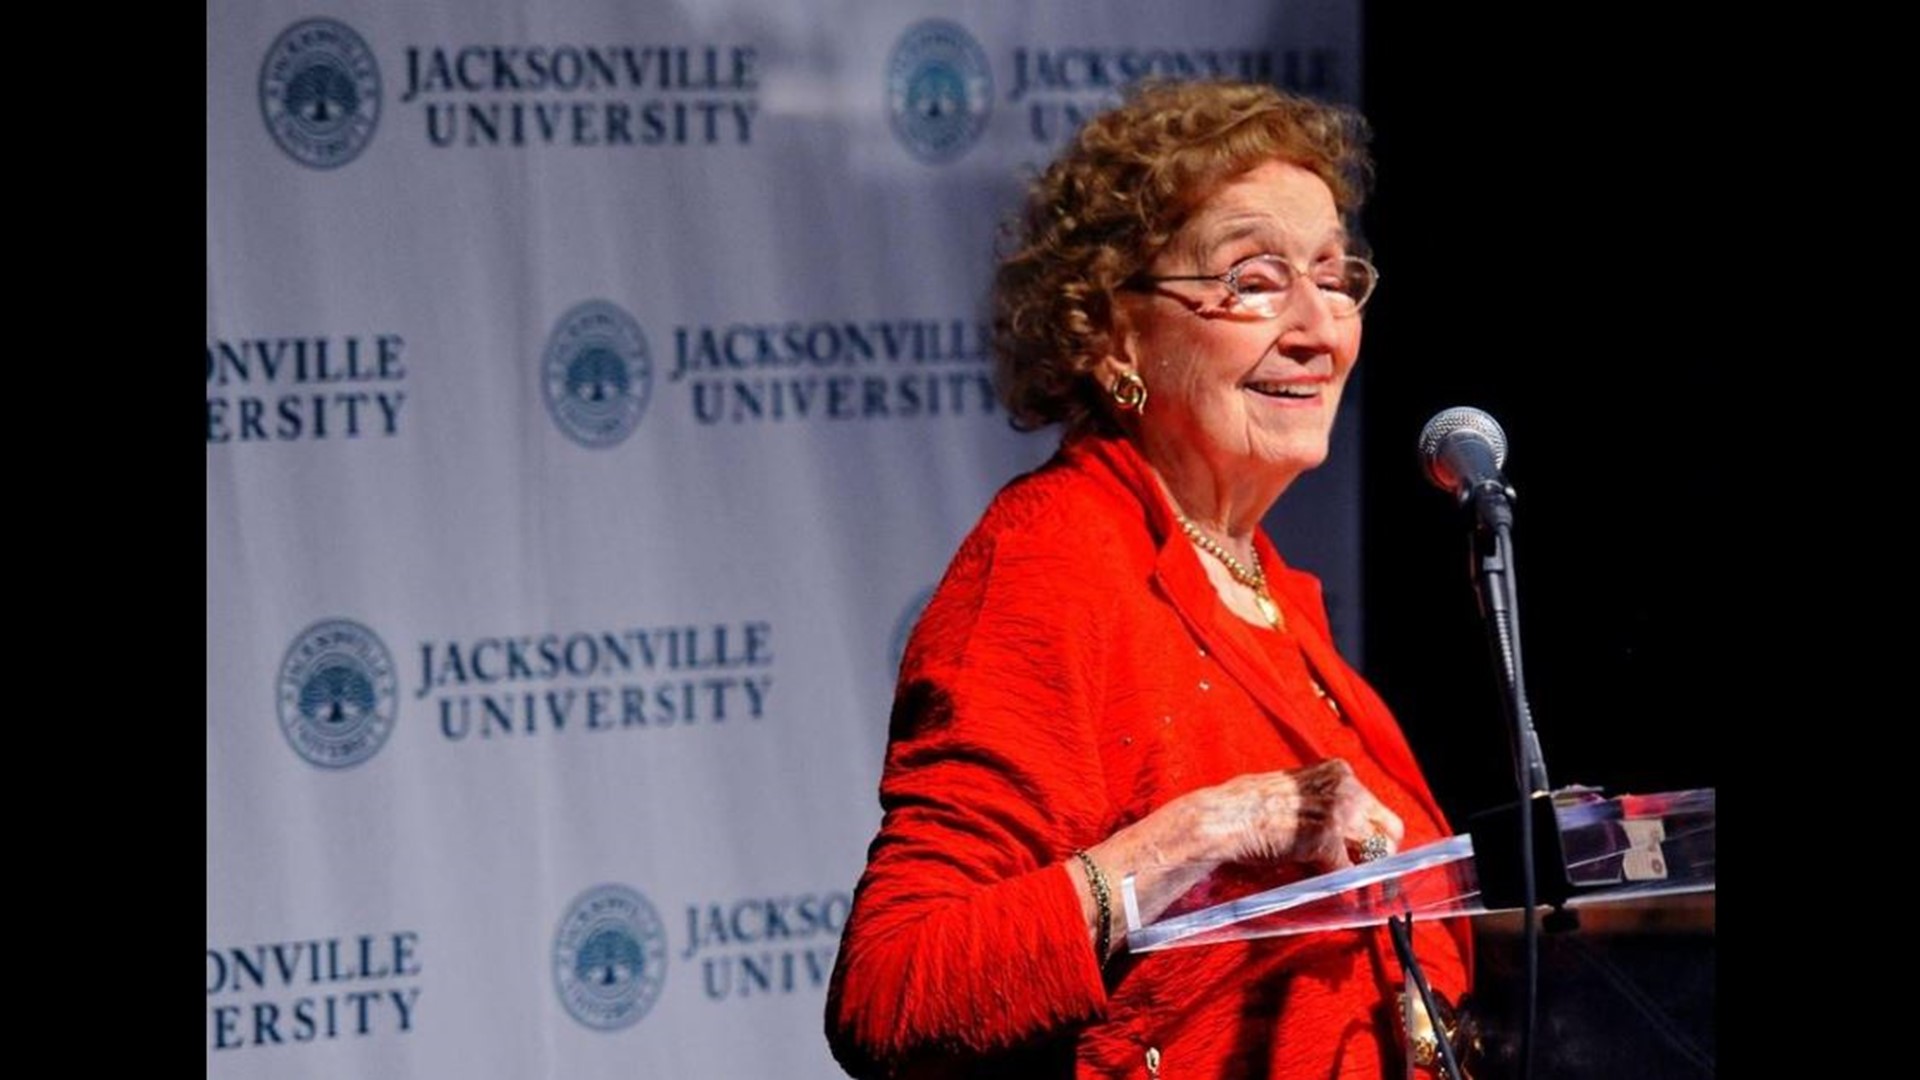 Dr. Frances Bartlett Kinne, who helped shape the course of Jacksonville University for decades, has died at age 102.